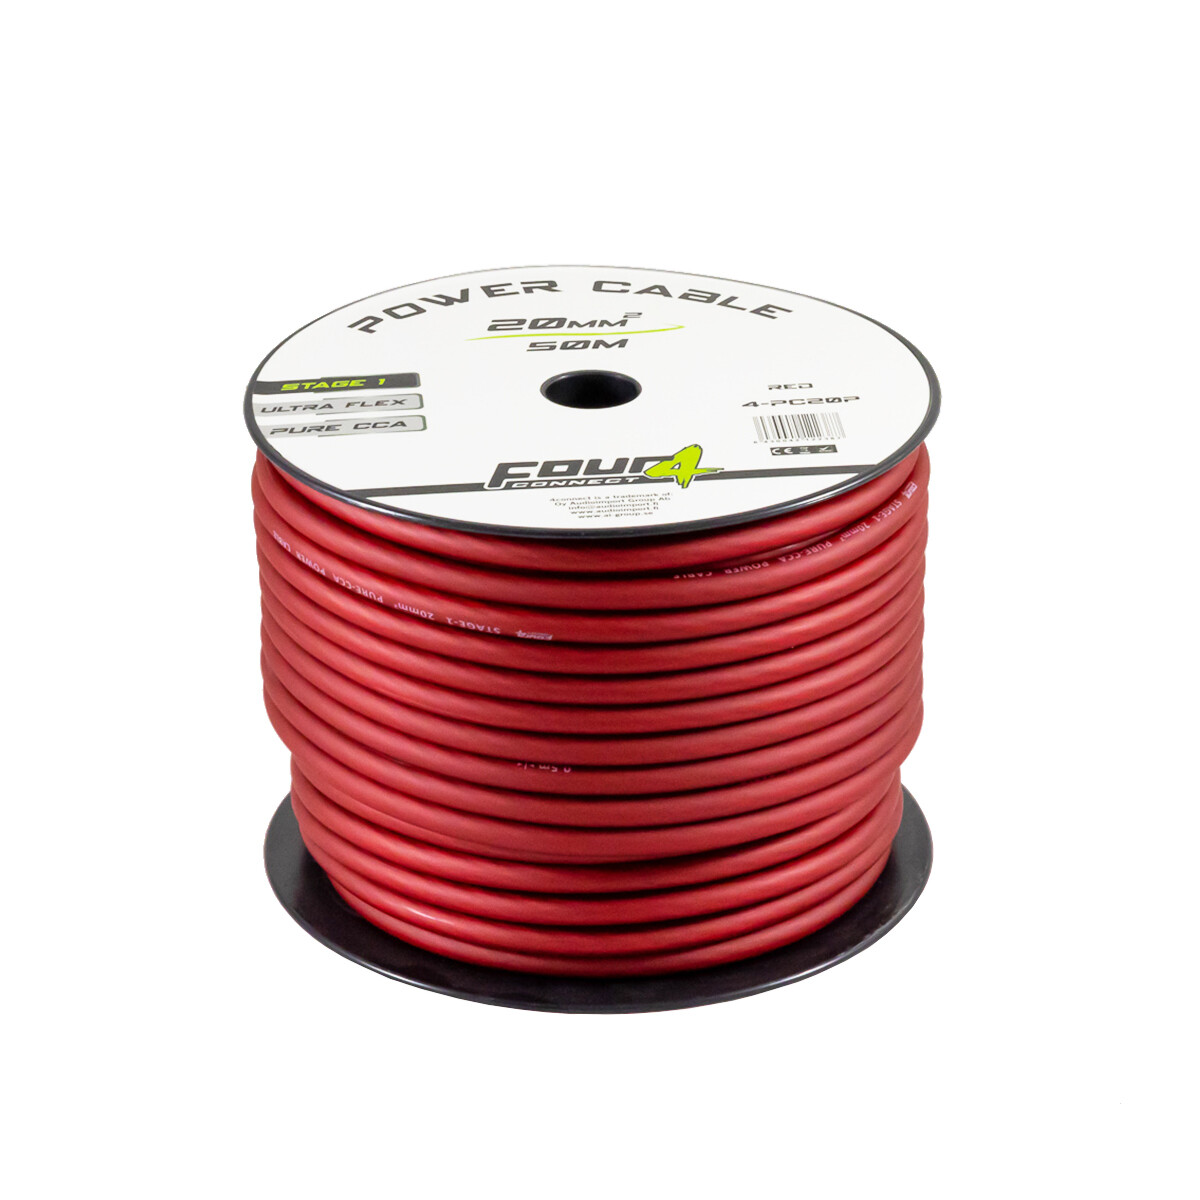 FOUR Connect 4-PC20P power cable 20mm2 red 50m